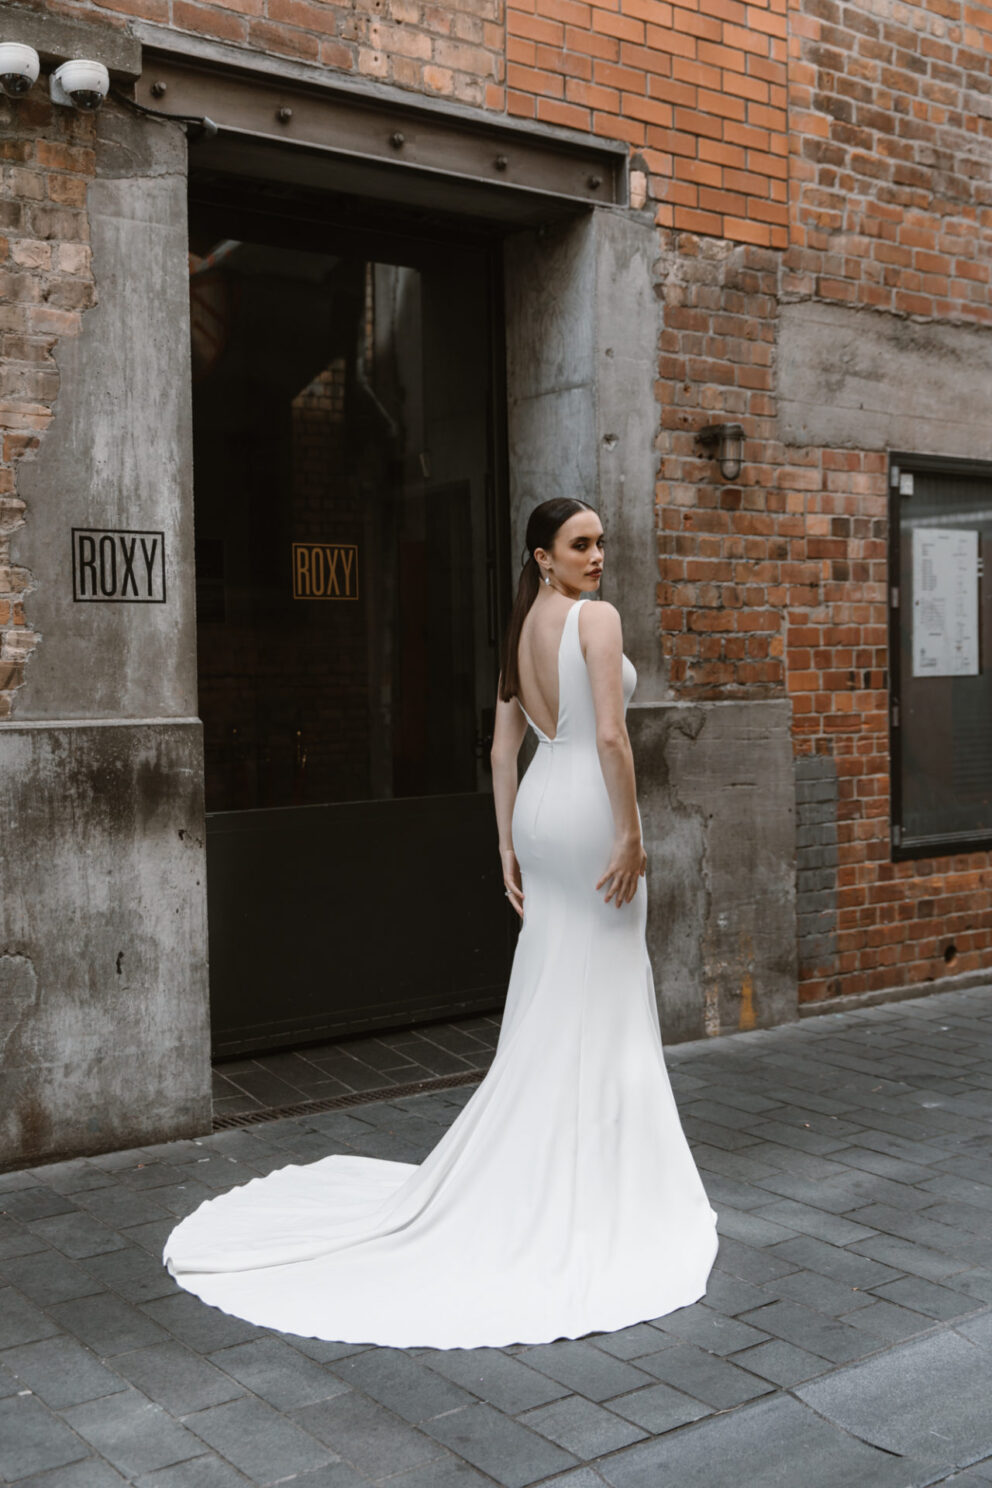 A clean, classic Mermaid dress in crepe, perfect for the minimalist bride. The V-neck & open back with carefully placed seam lines enhances the silhouette